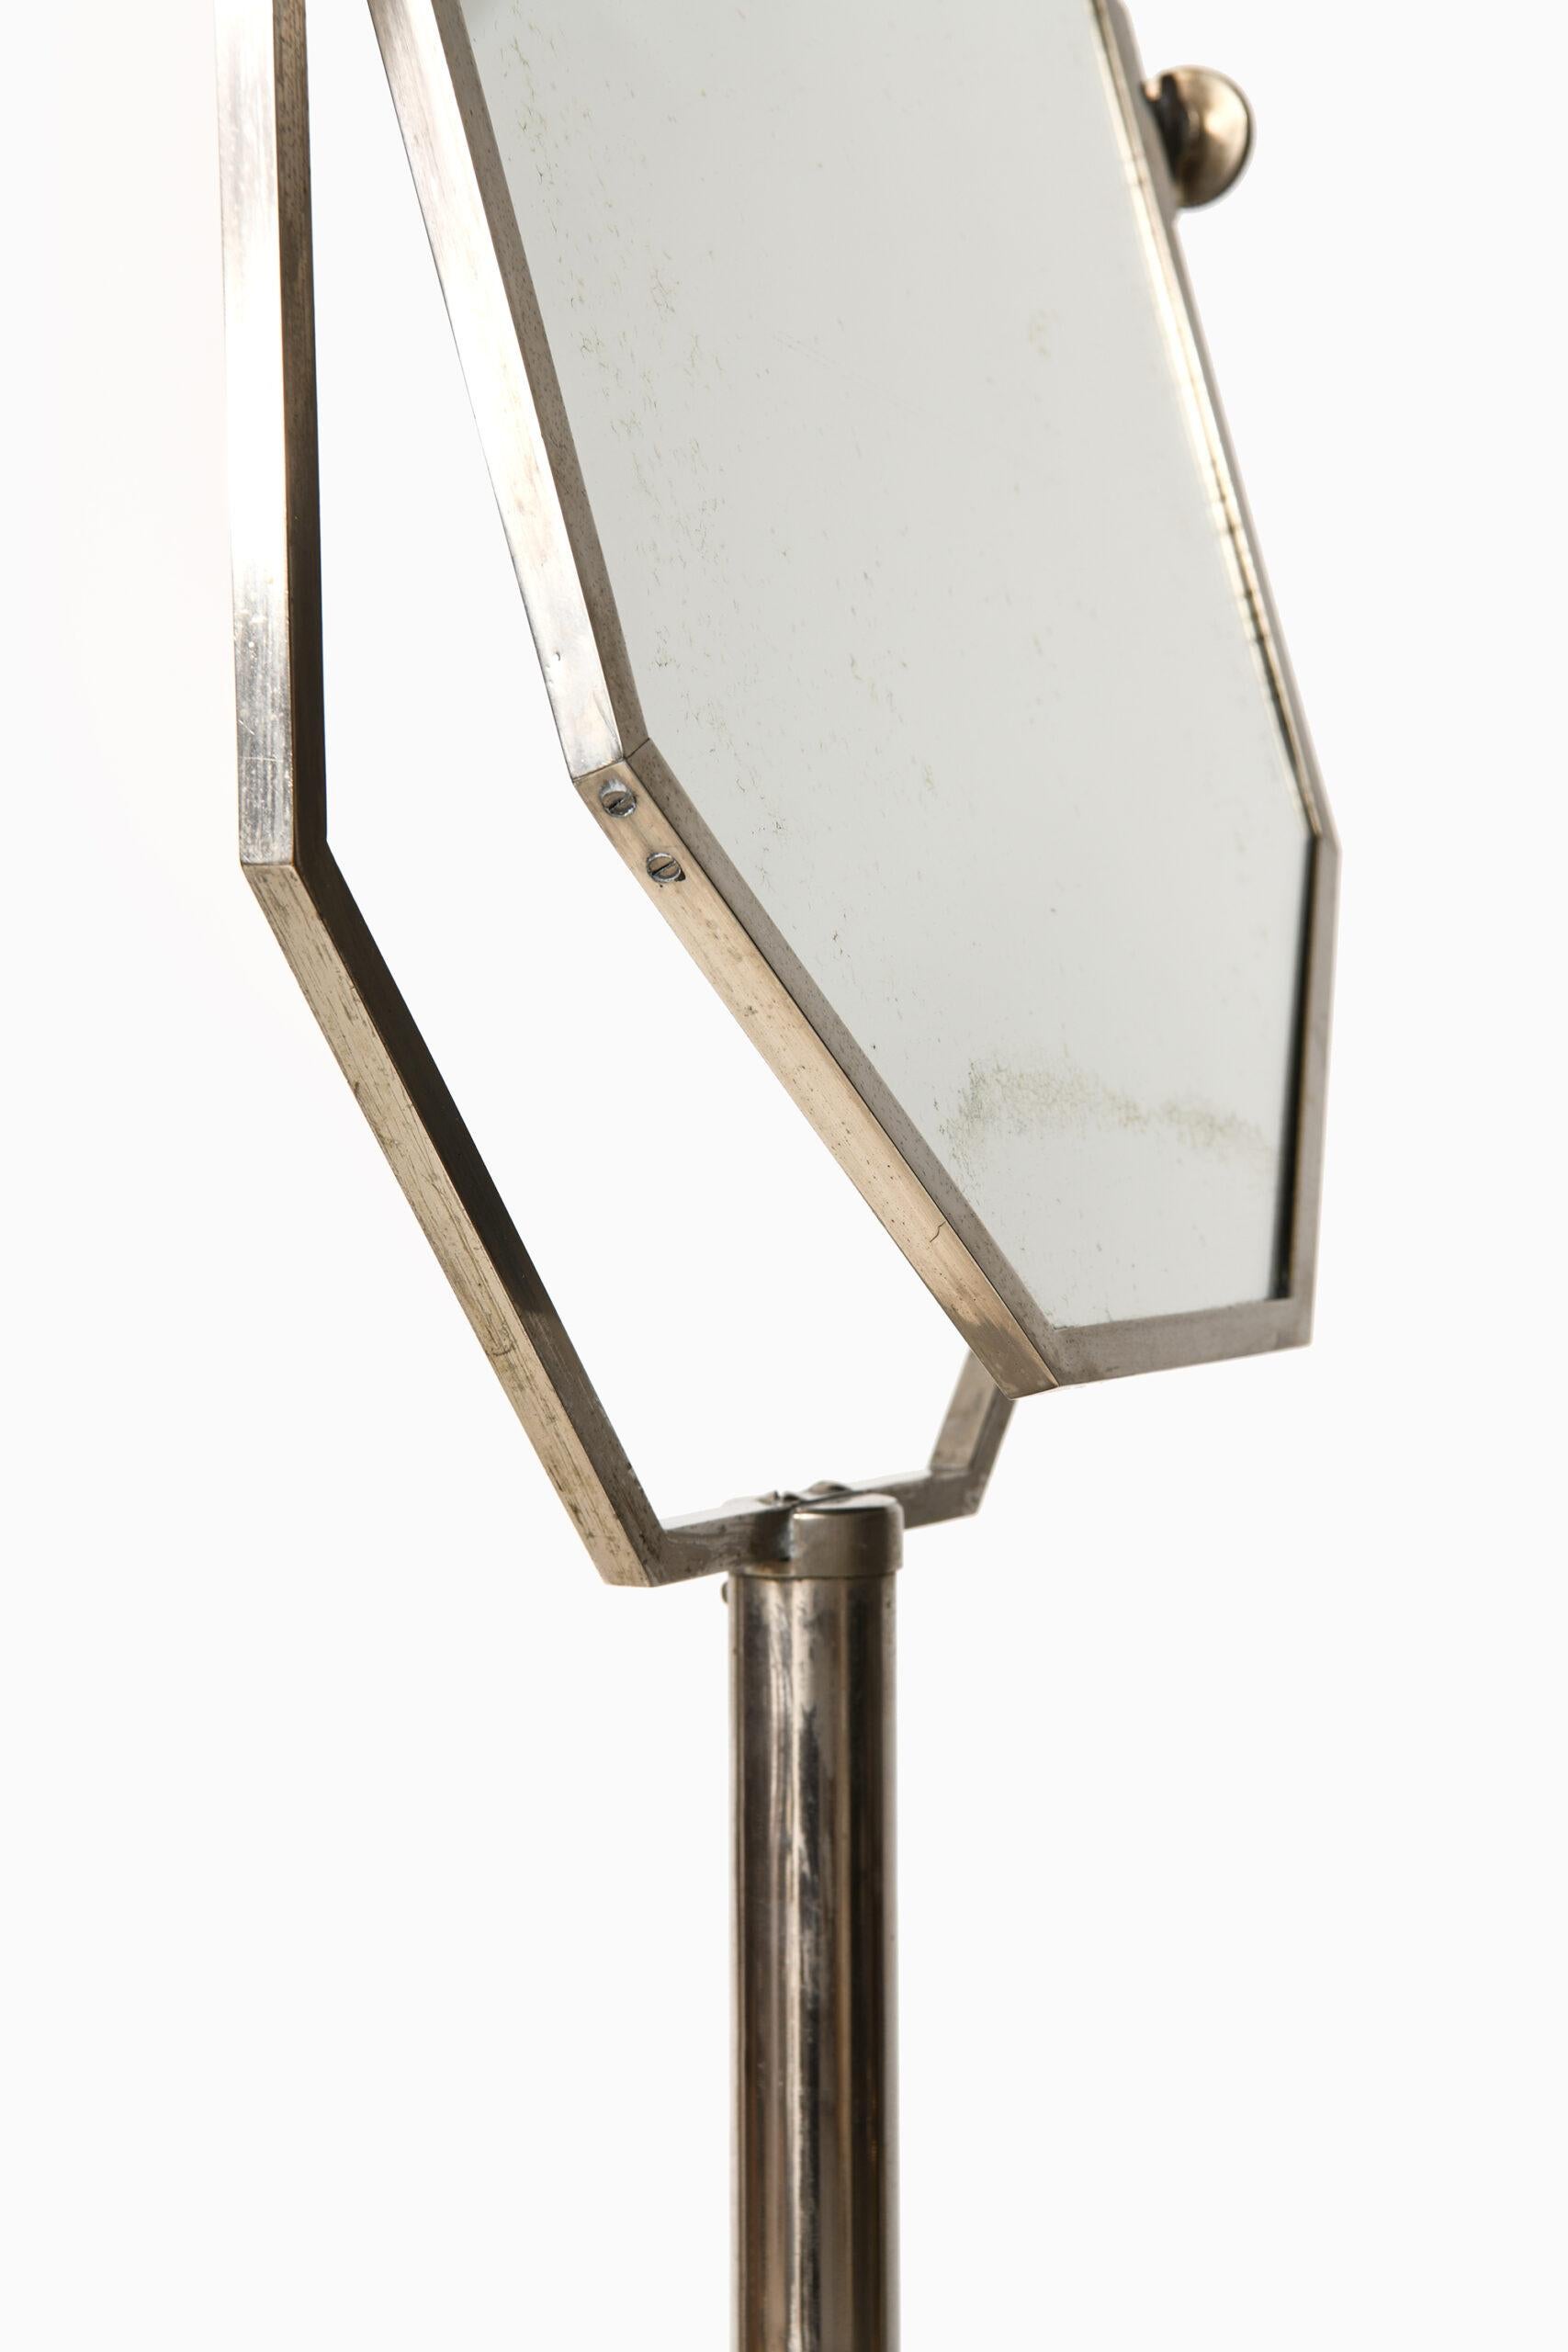 Table Mirror Probably Produced in Sweden In Good Condition For Sale In Limhamn, Skåne län